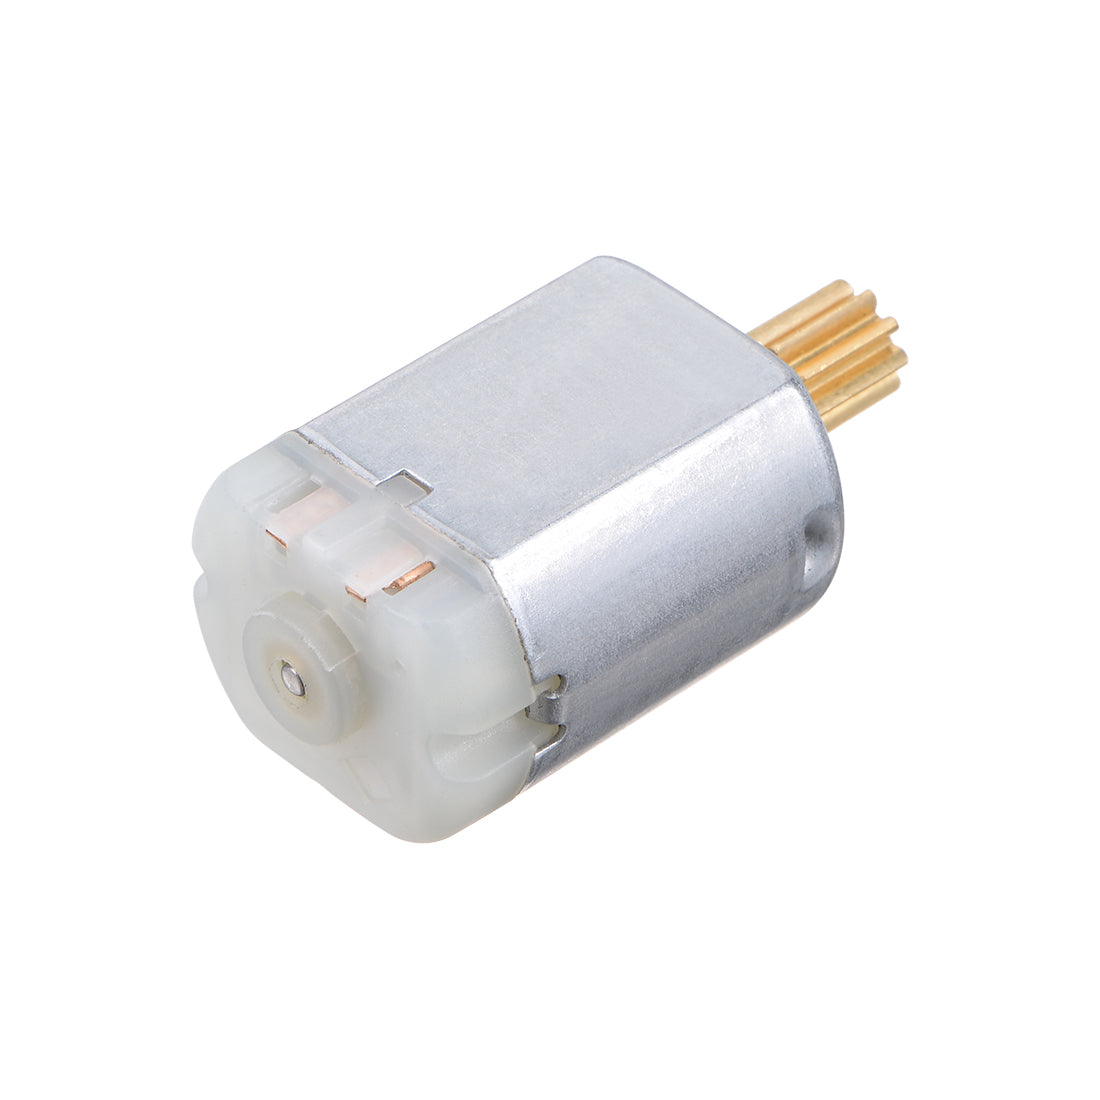 uxcell Uxcell DC 12V 15000RPM 7.5mmx8mm Shaft DC Motor 2 Pcs for Model Toy